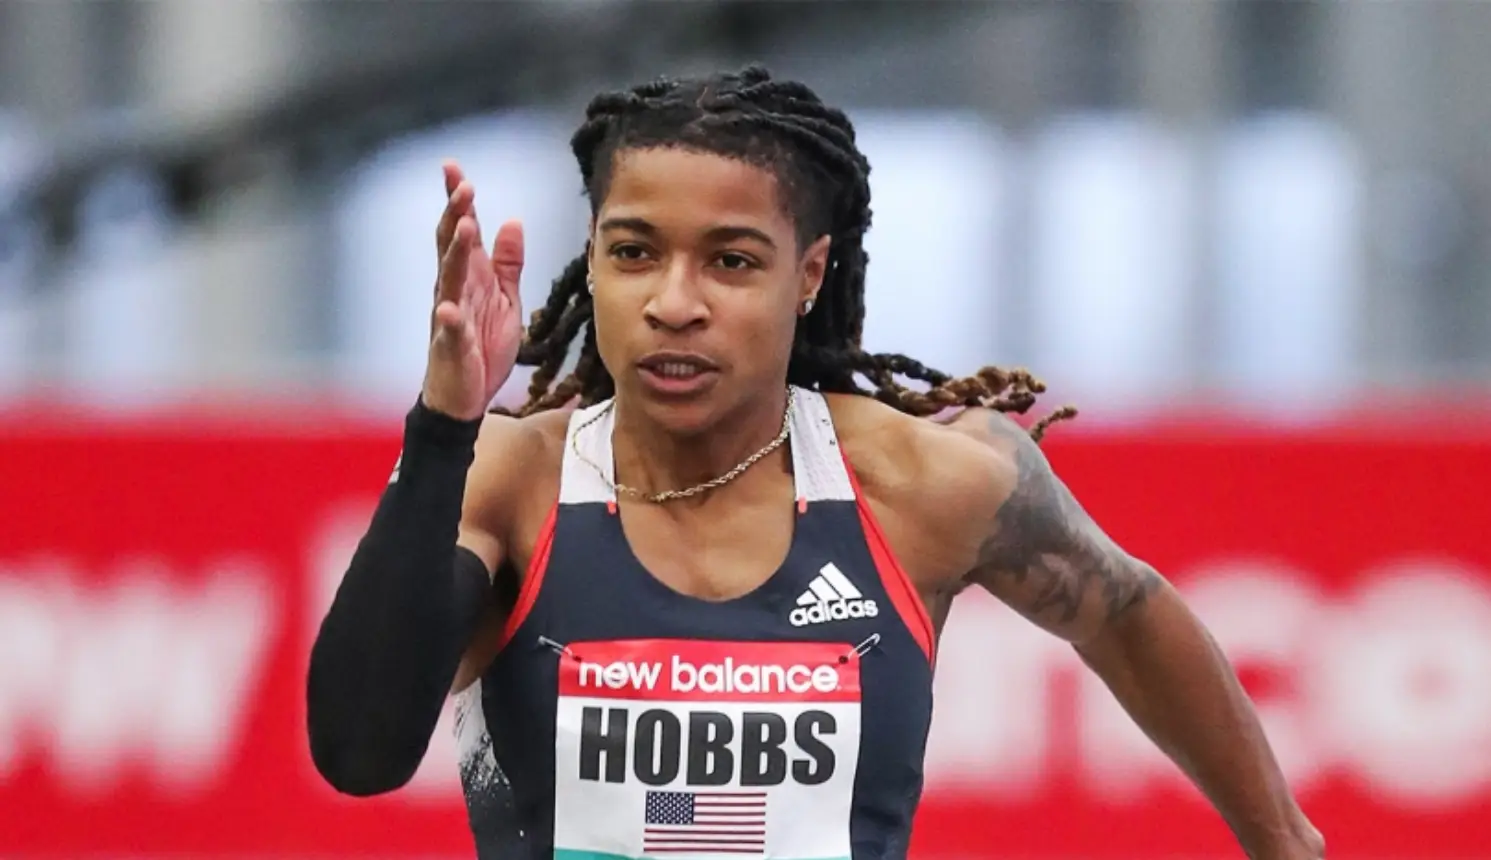 Aleia Hobbs stormed to 6.94secs, wins 60m at US Indoor Championships 2023